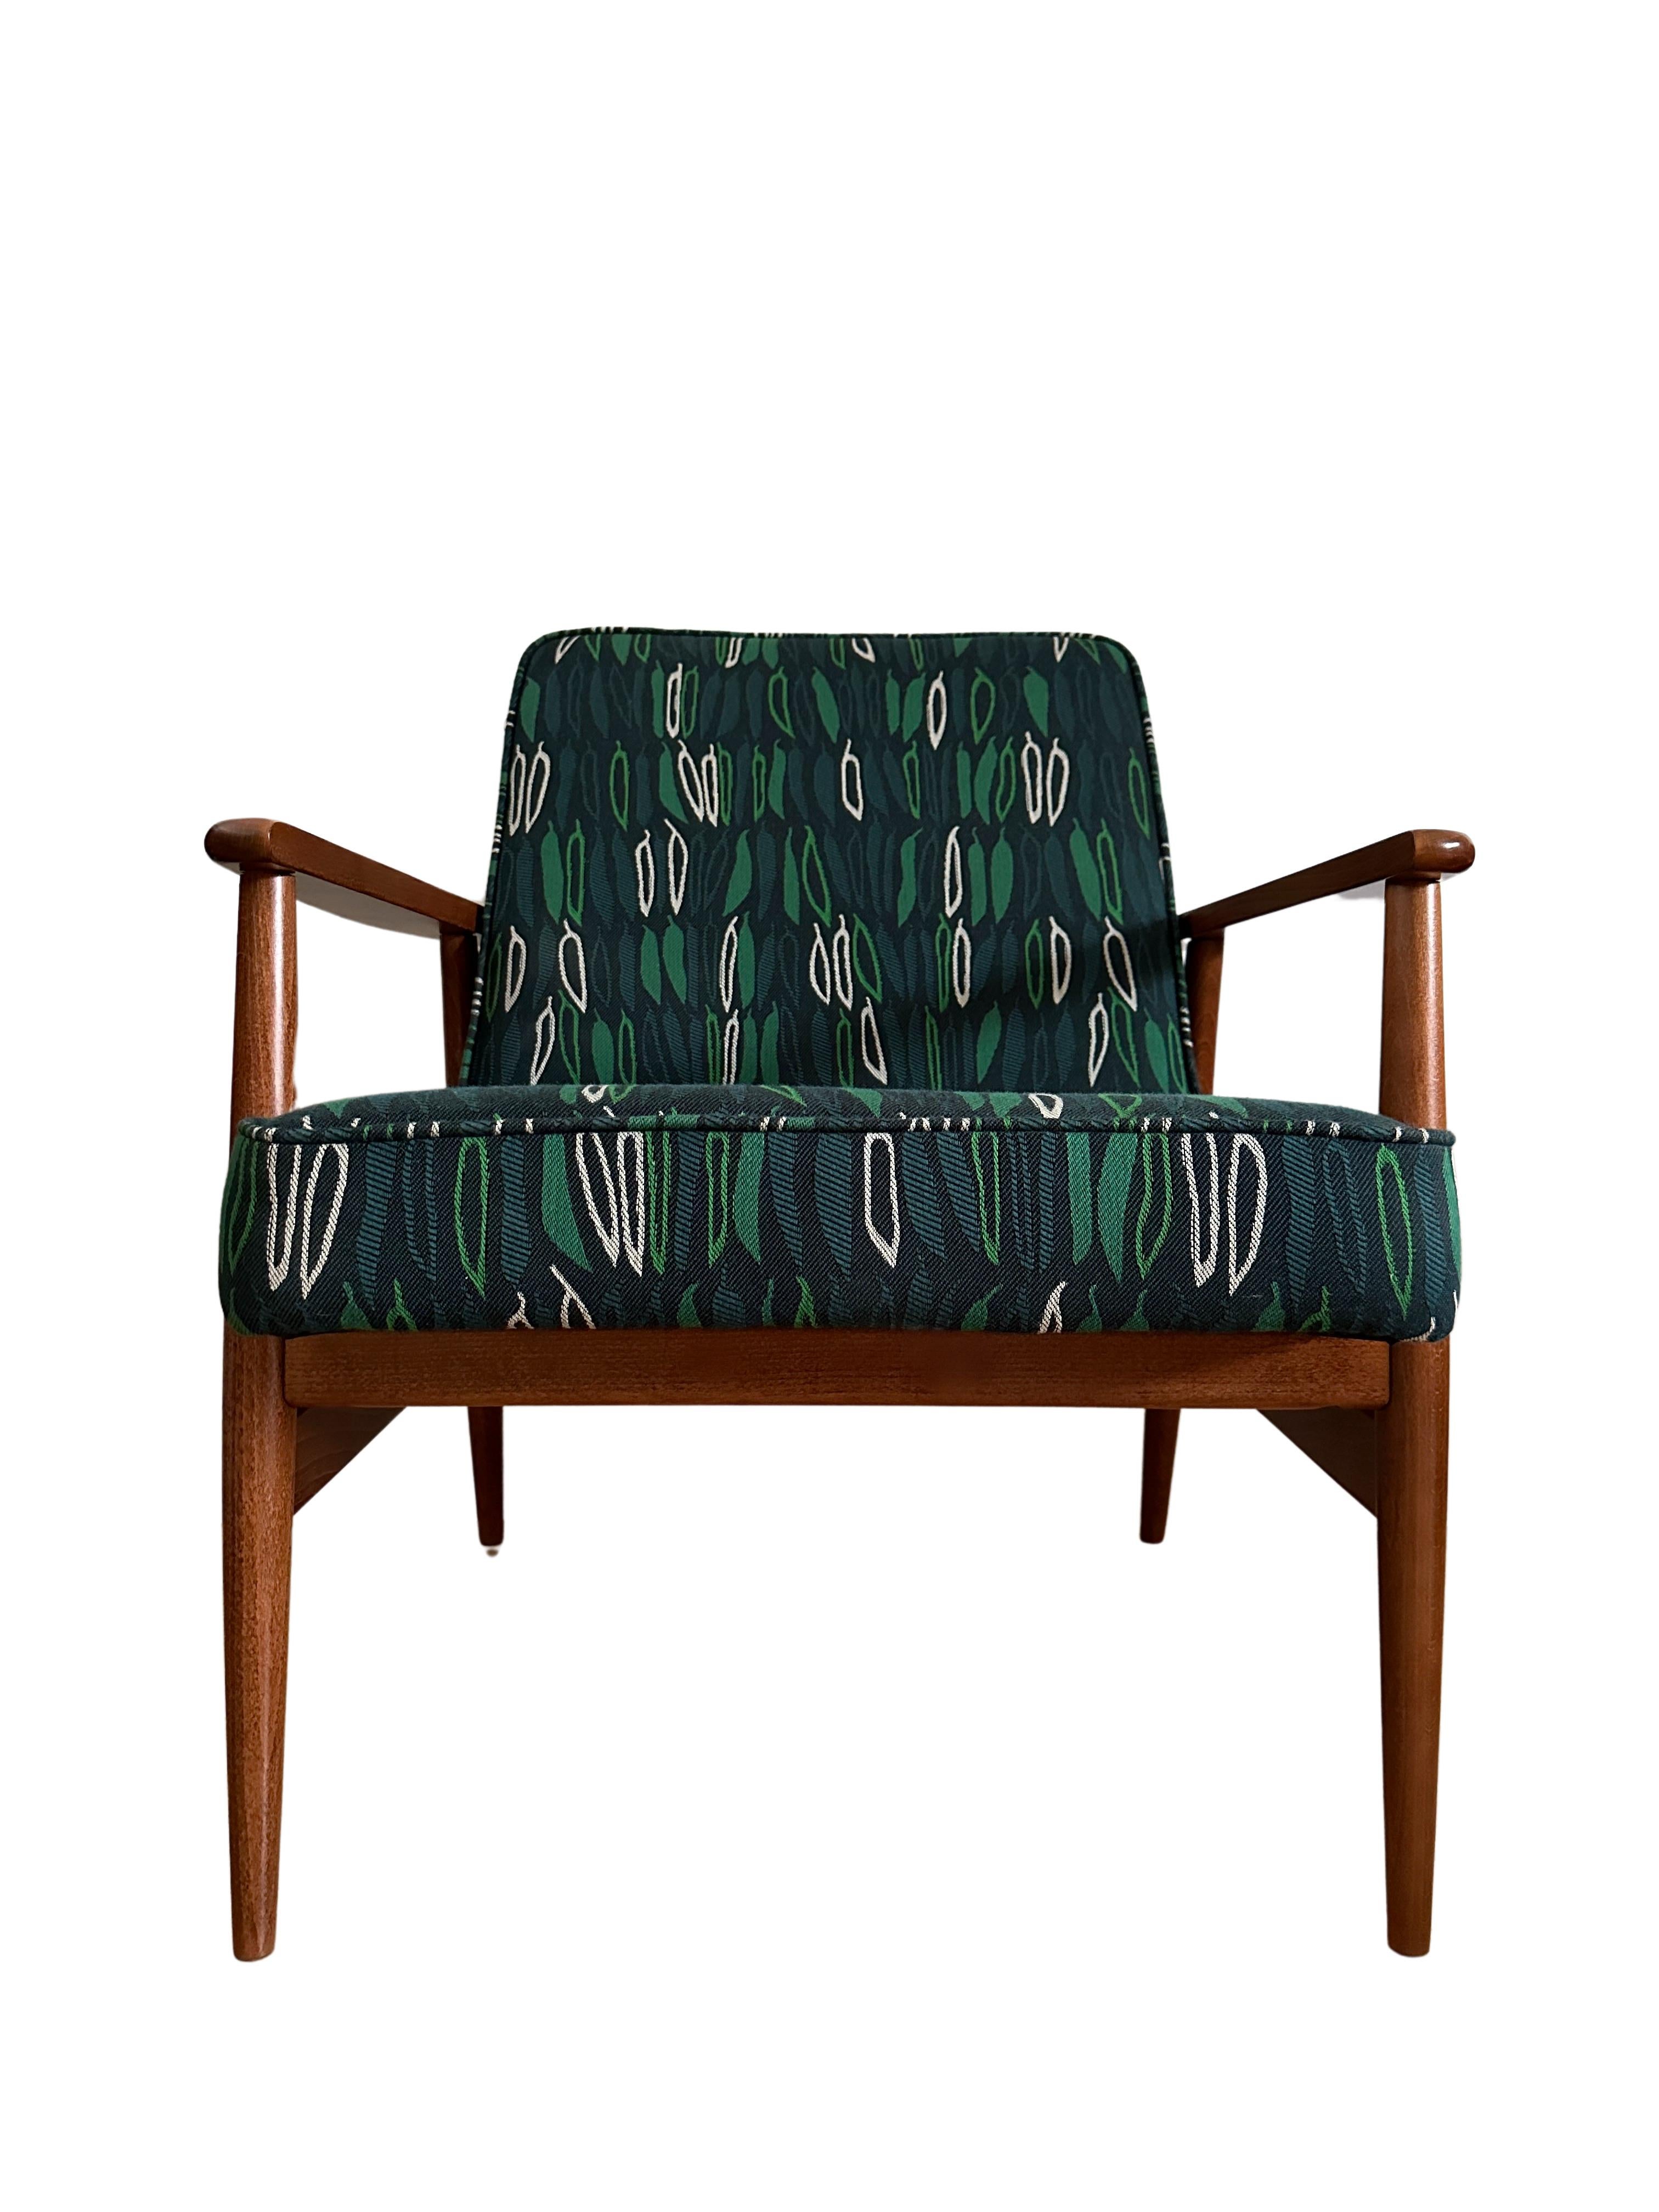 Hand-Crafted Set of Midcentury Armchairs, by Juliszu Kędziorek in Green Jacquard, 1960s For Sale